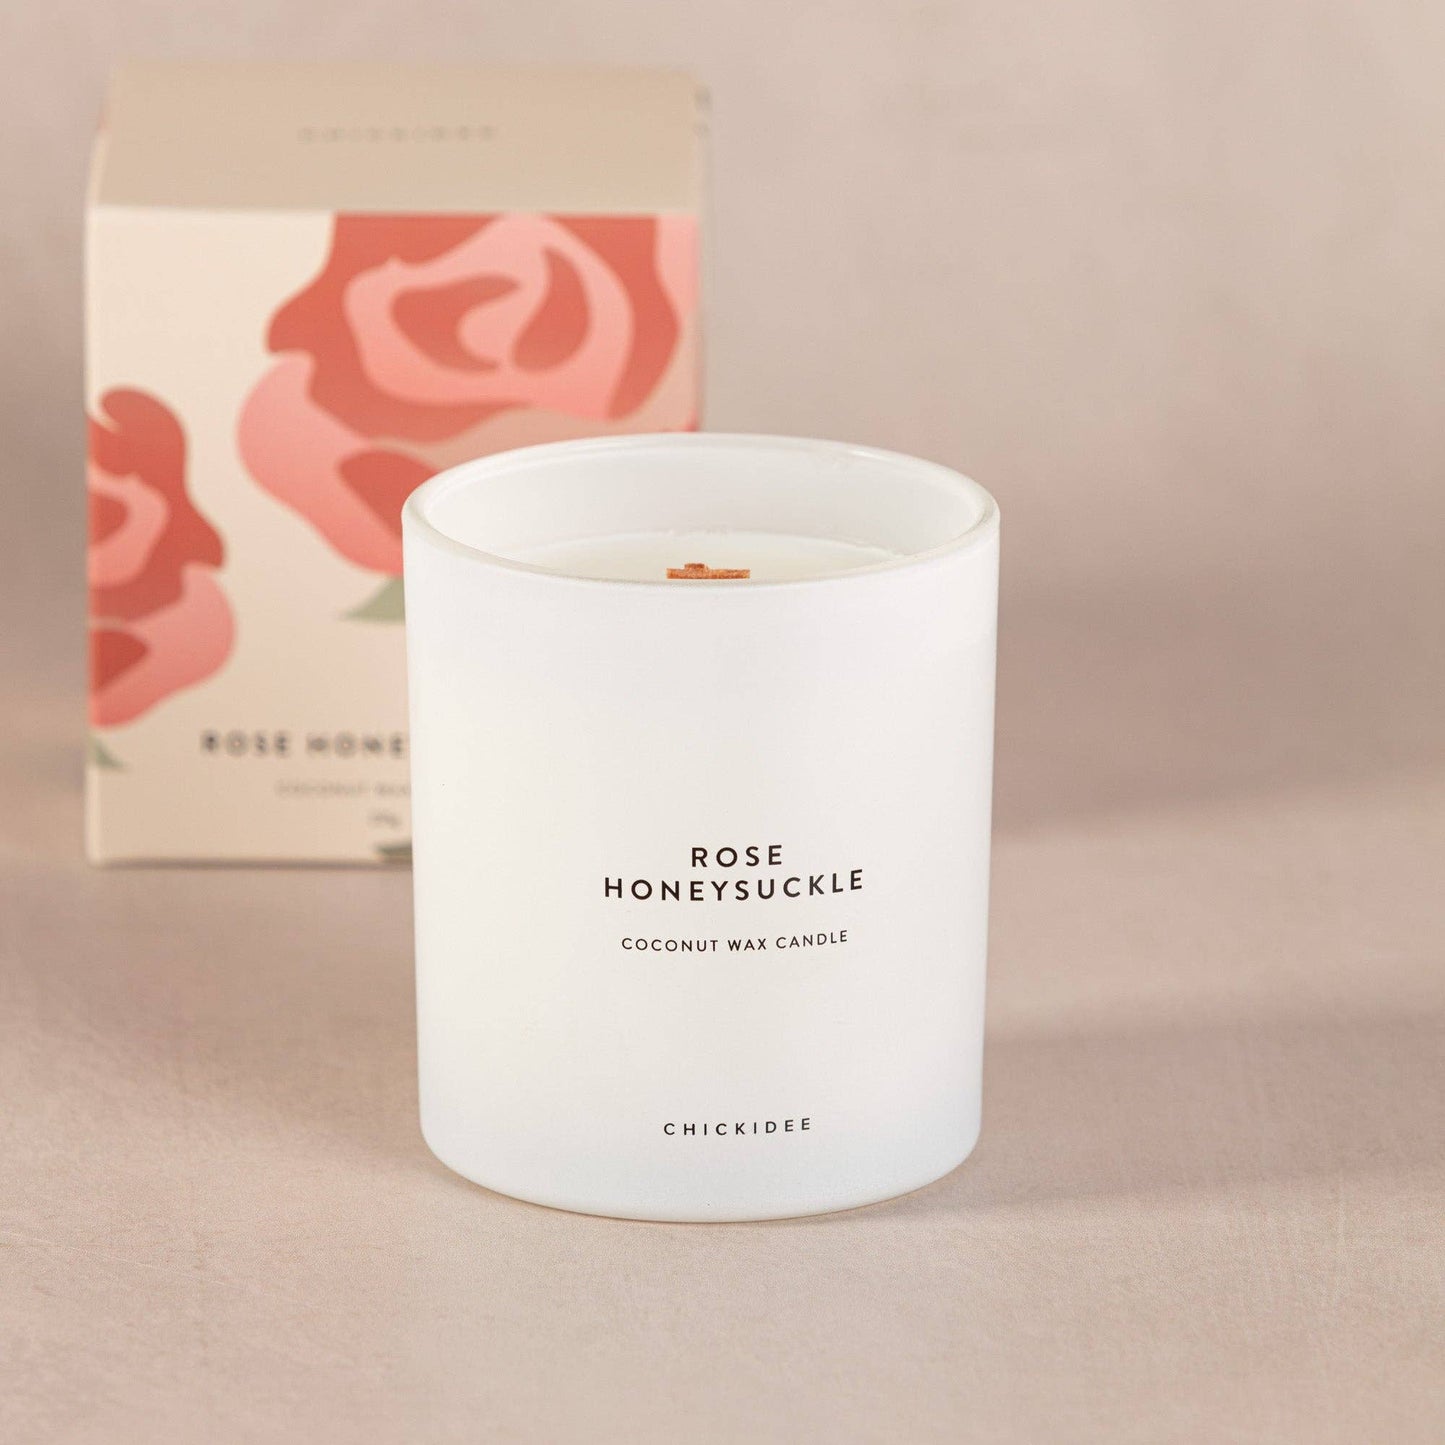 ROSE HONEYSUCKLE BLOOM CANDLE | CHICKIDEE | 60 HRS BURN TIME